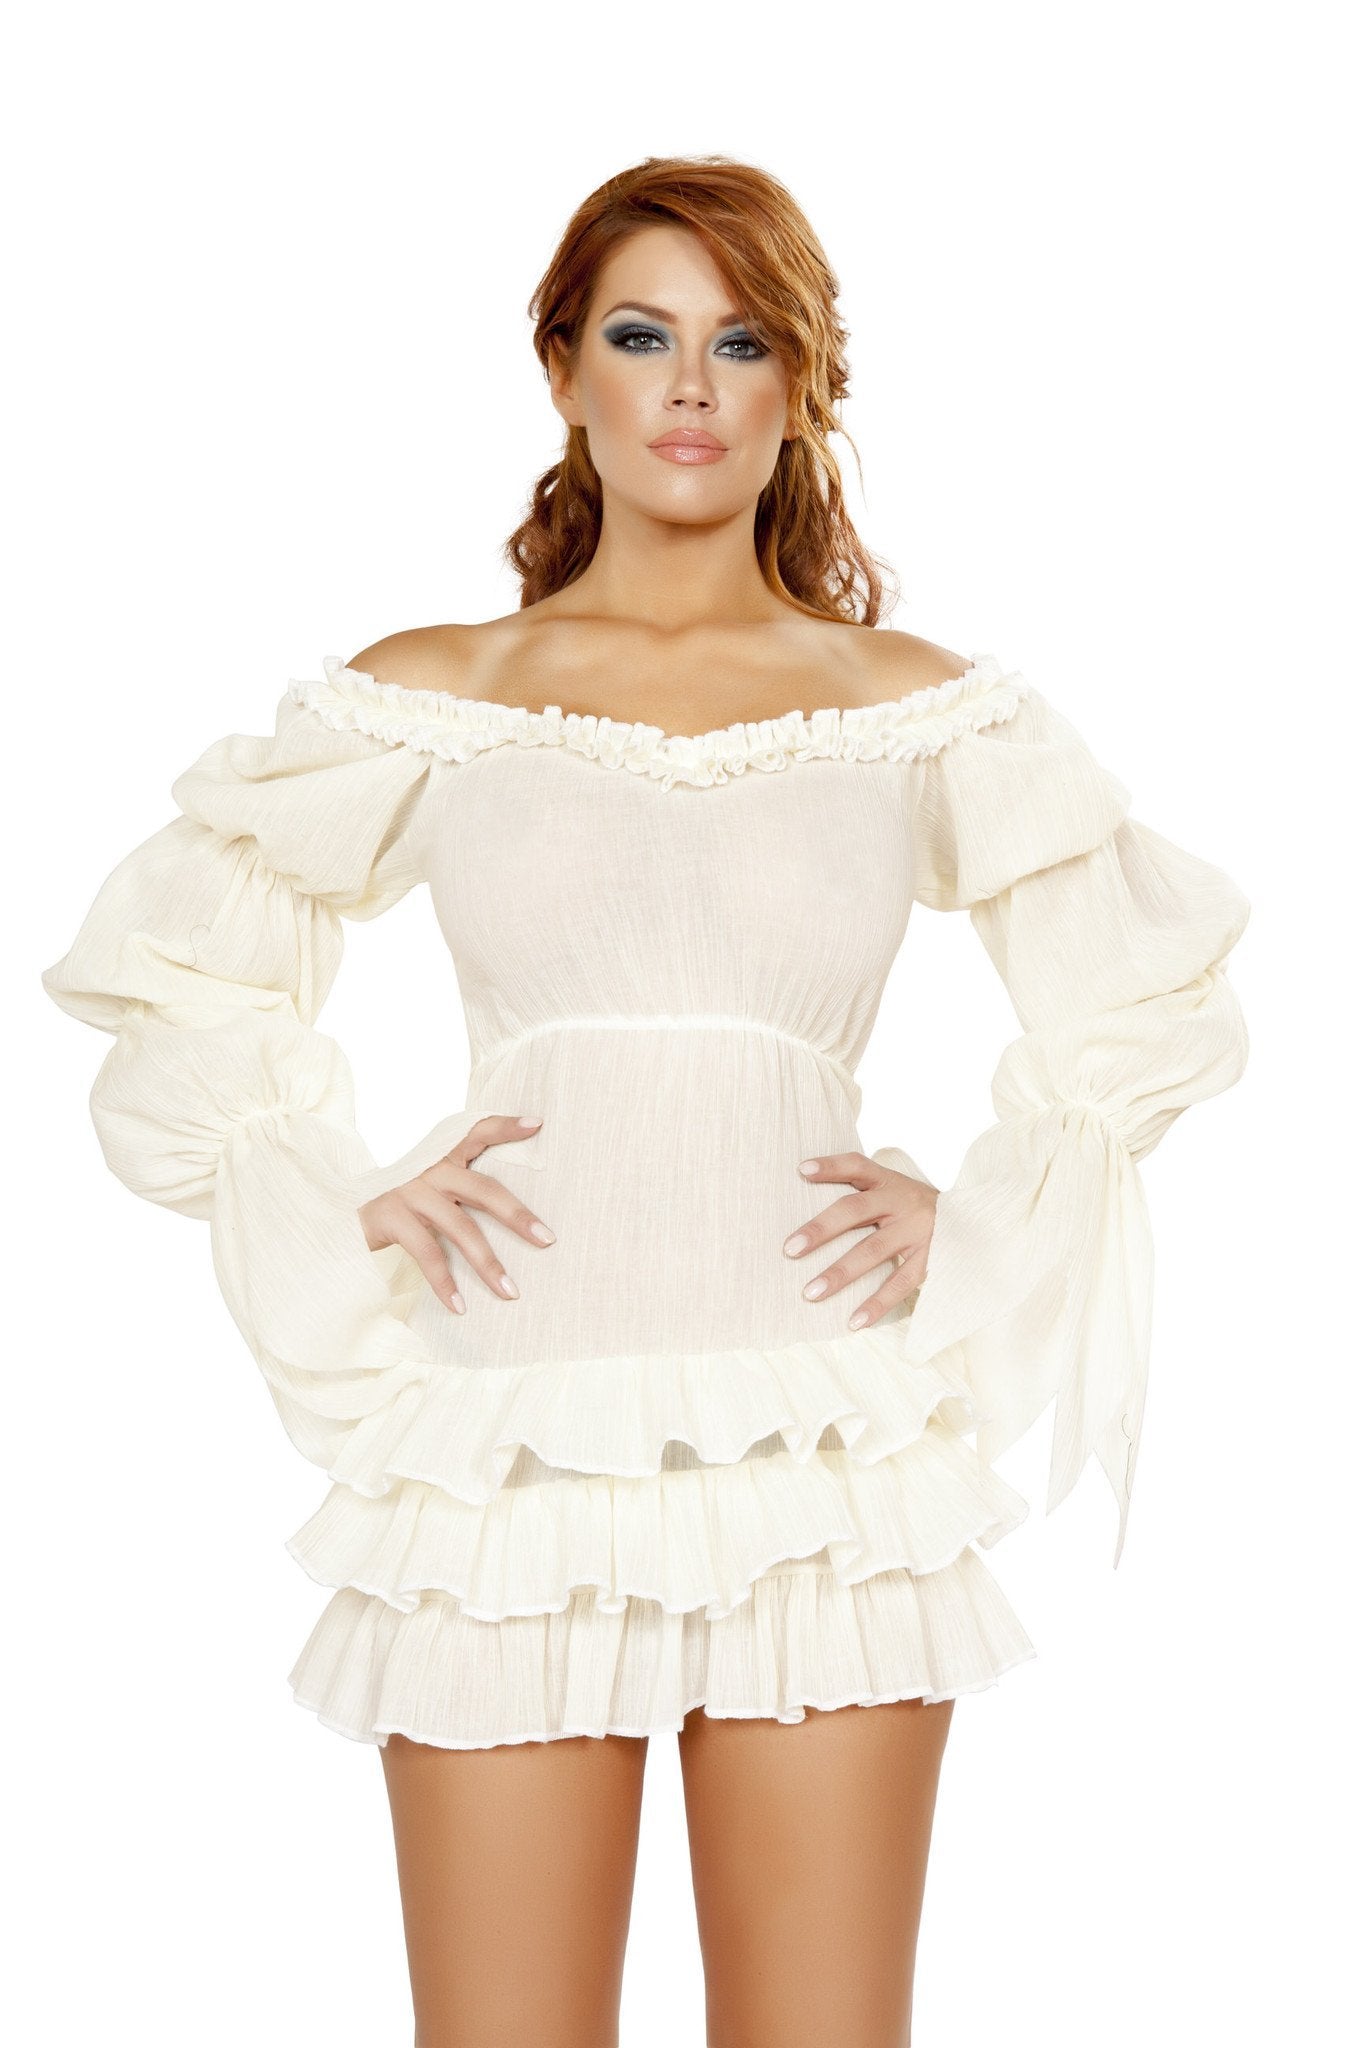 Buy Ruffled Pirate Dress with Sleeves from RomaRetailShop for 22.50 with Same Day Shipping Designed by Roma Costume 4770-Wht-S